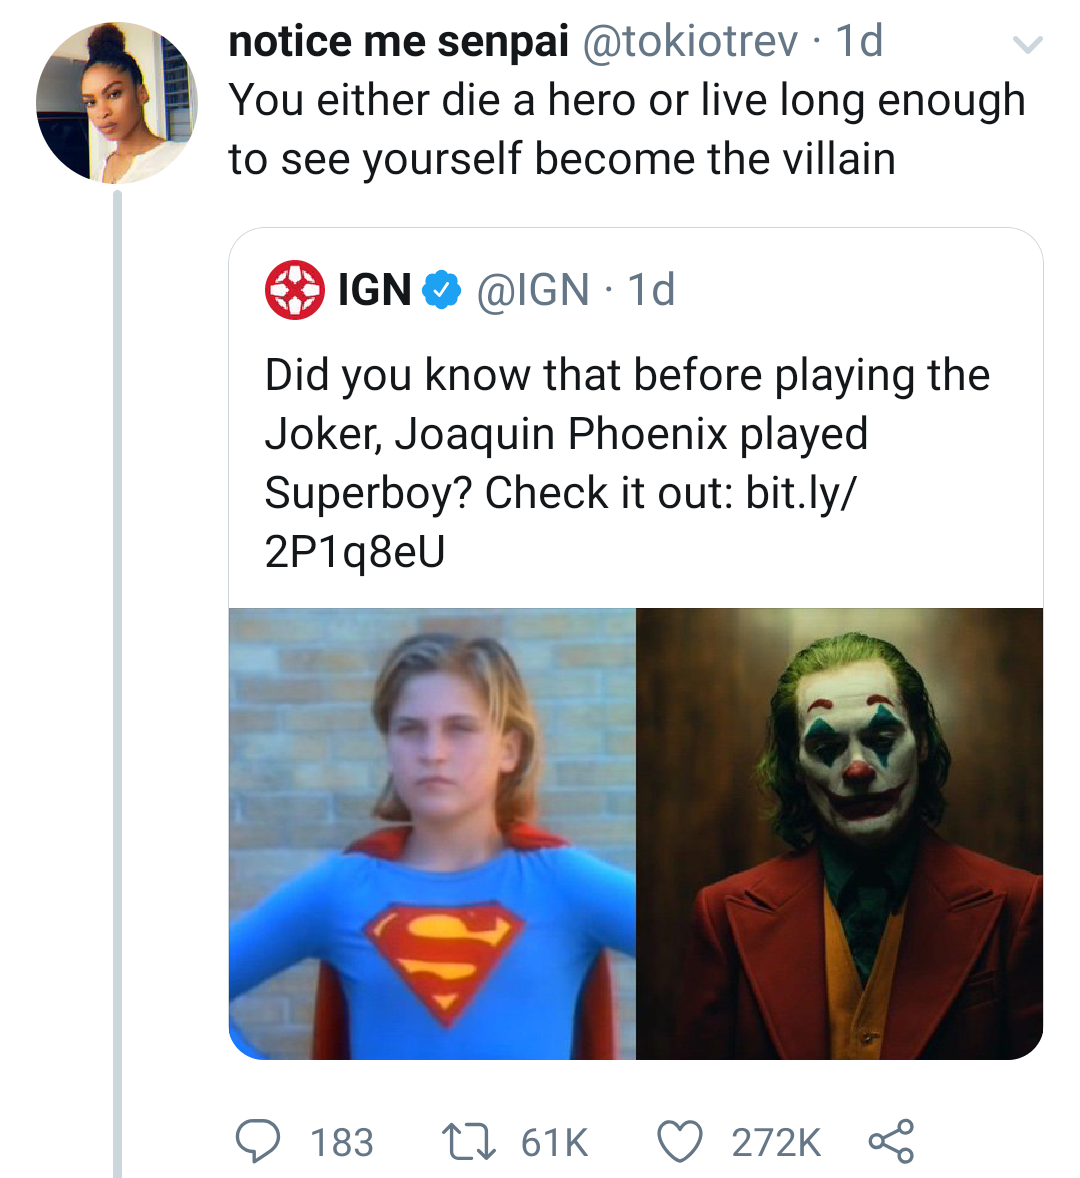 smile - notice me senpai . 1d You either die a hero or live long enough to see yourself become the villain Ign . 10 Did you know that before playing the Joker, Joaquin Phoenix played Superboy? Check it out bit.ly 2P1q8eU 183 12